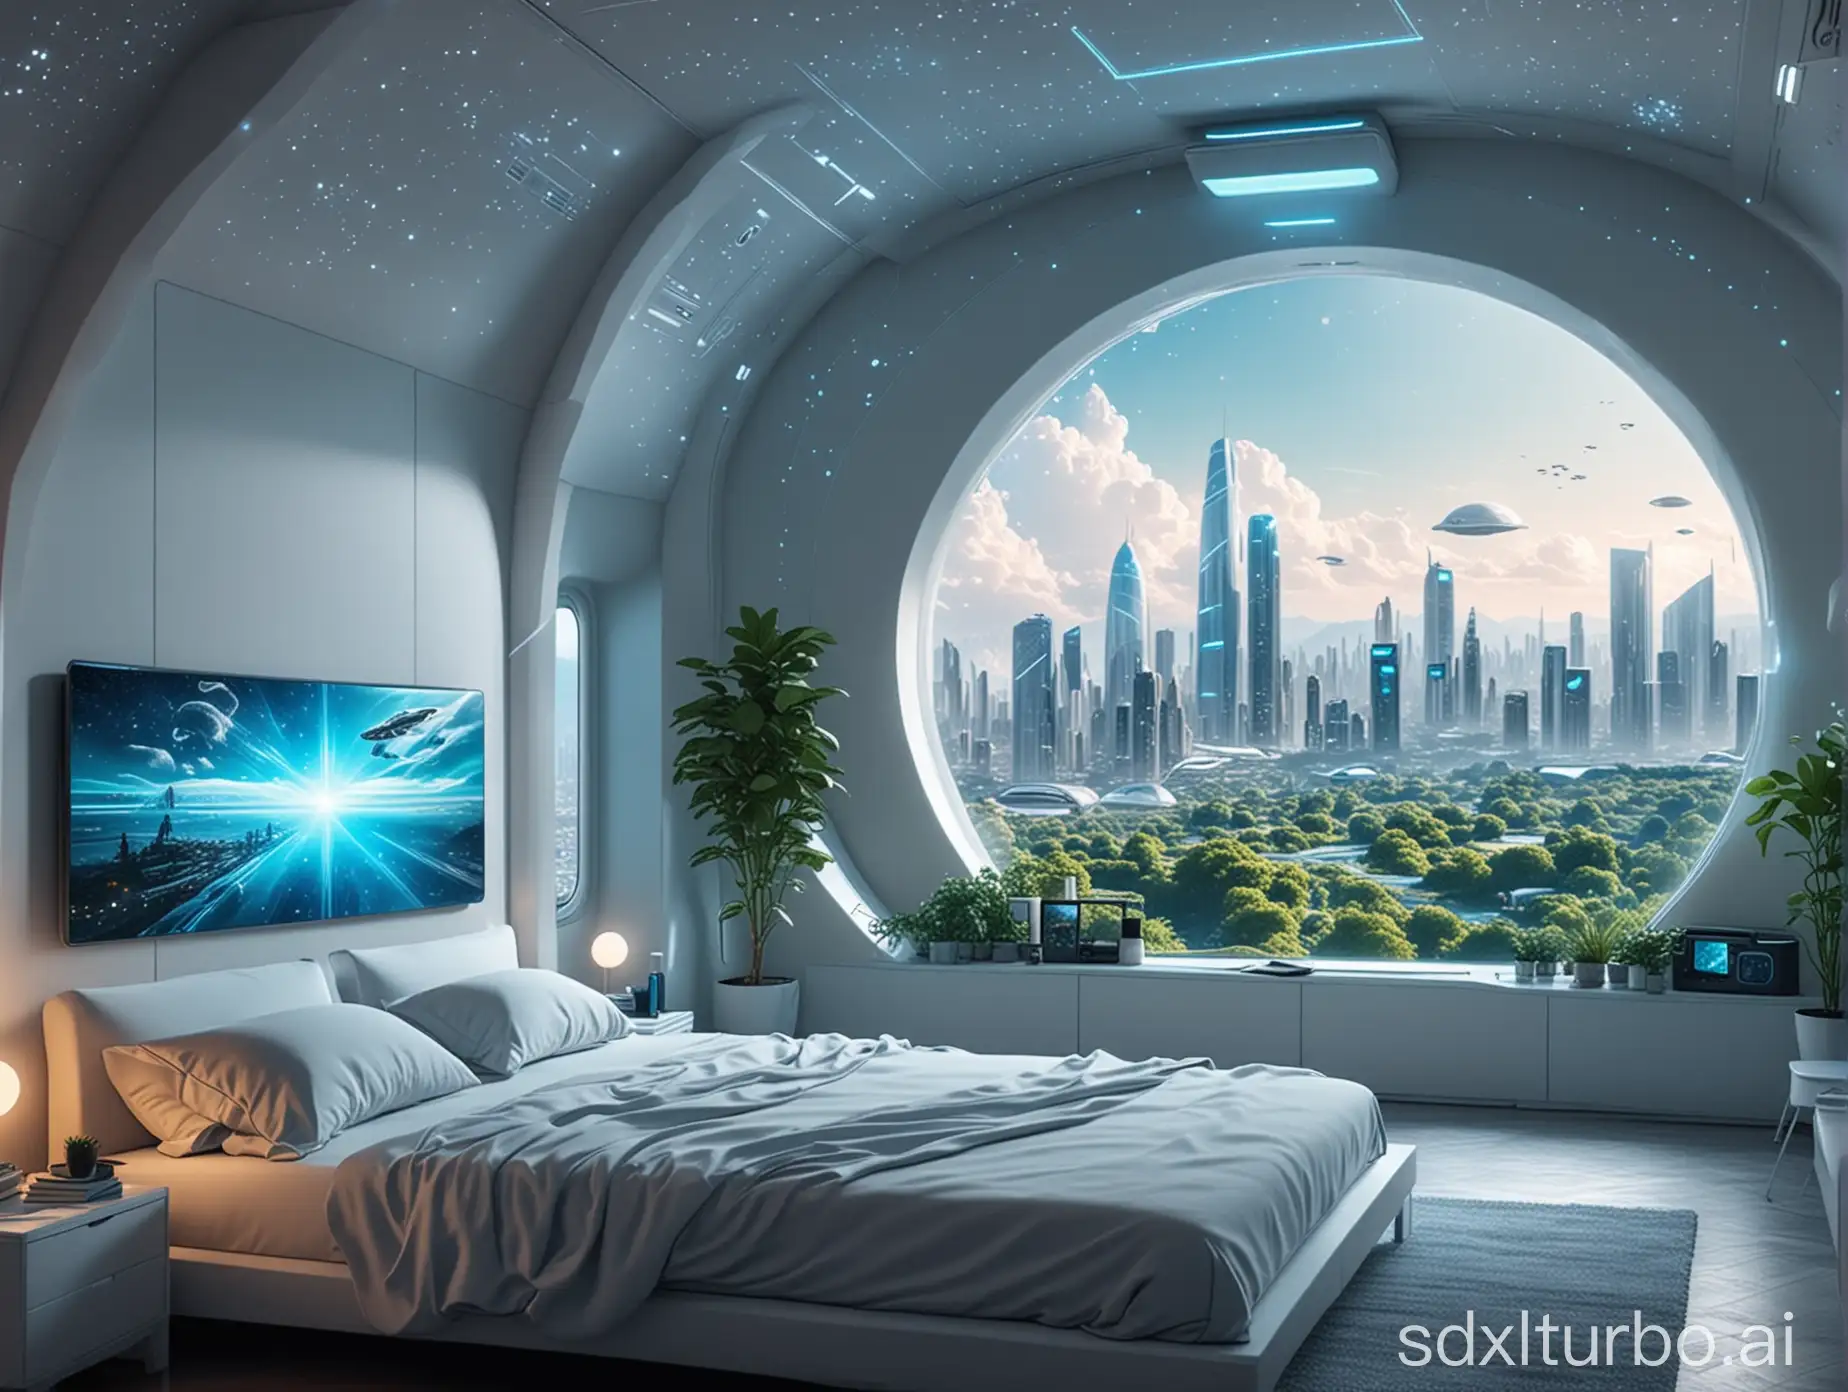 Sci-fi bedroom, white and light blue tones, a man talking to a holographic projection smart assistant, starry sky dome, future city skyline, autonomous flying vehicles, 8k resolution, realistic style, city greenery outside the window